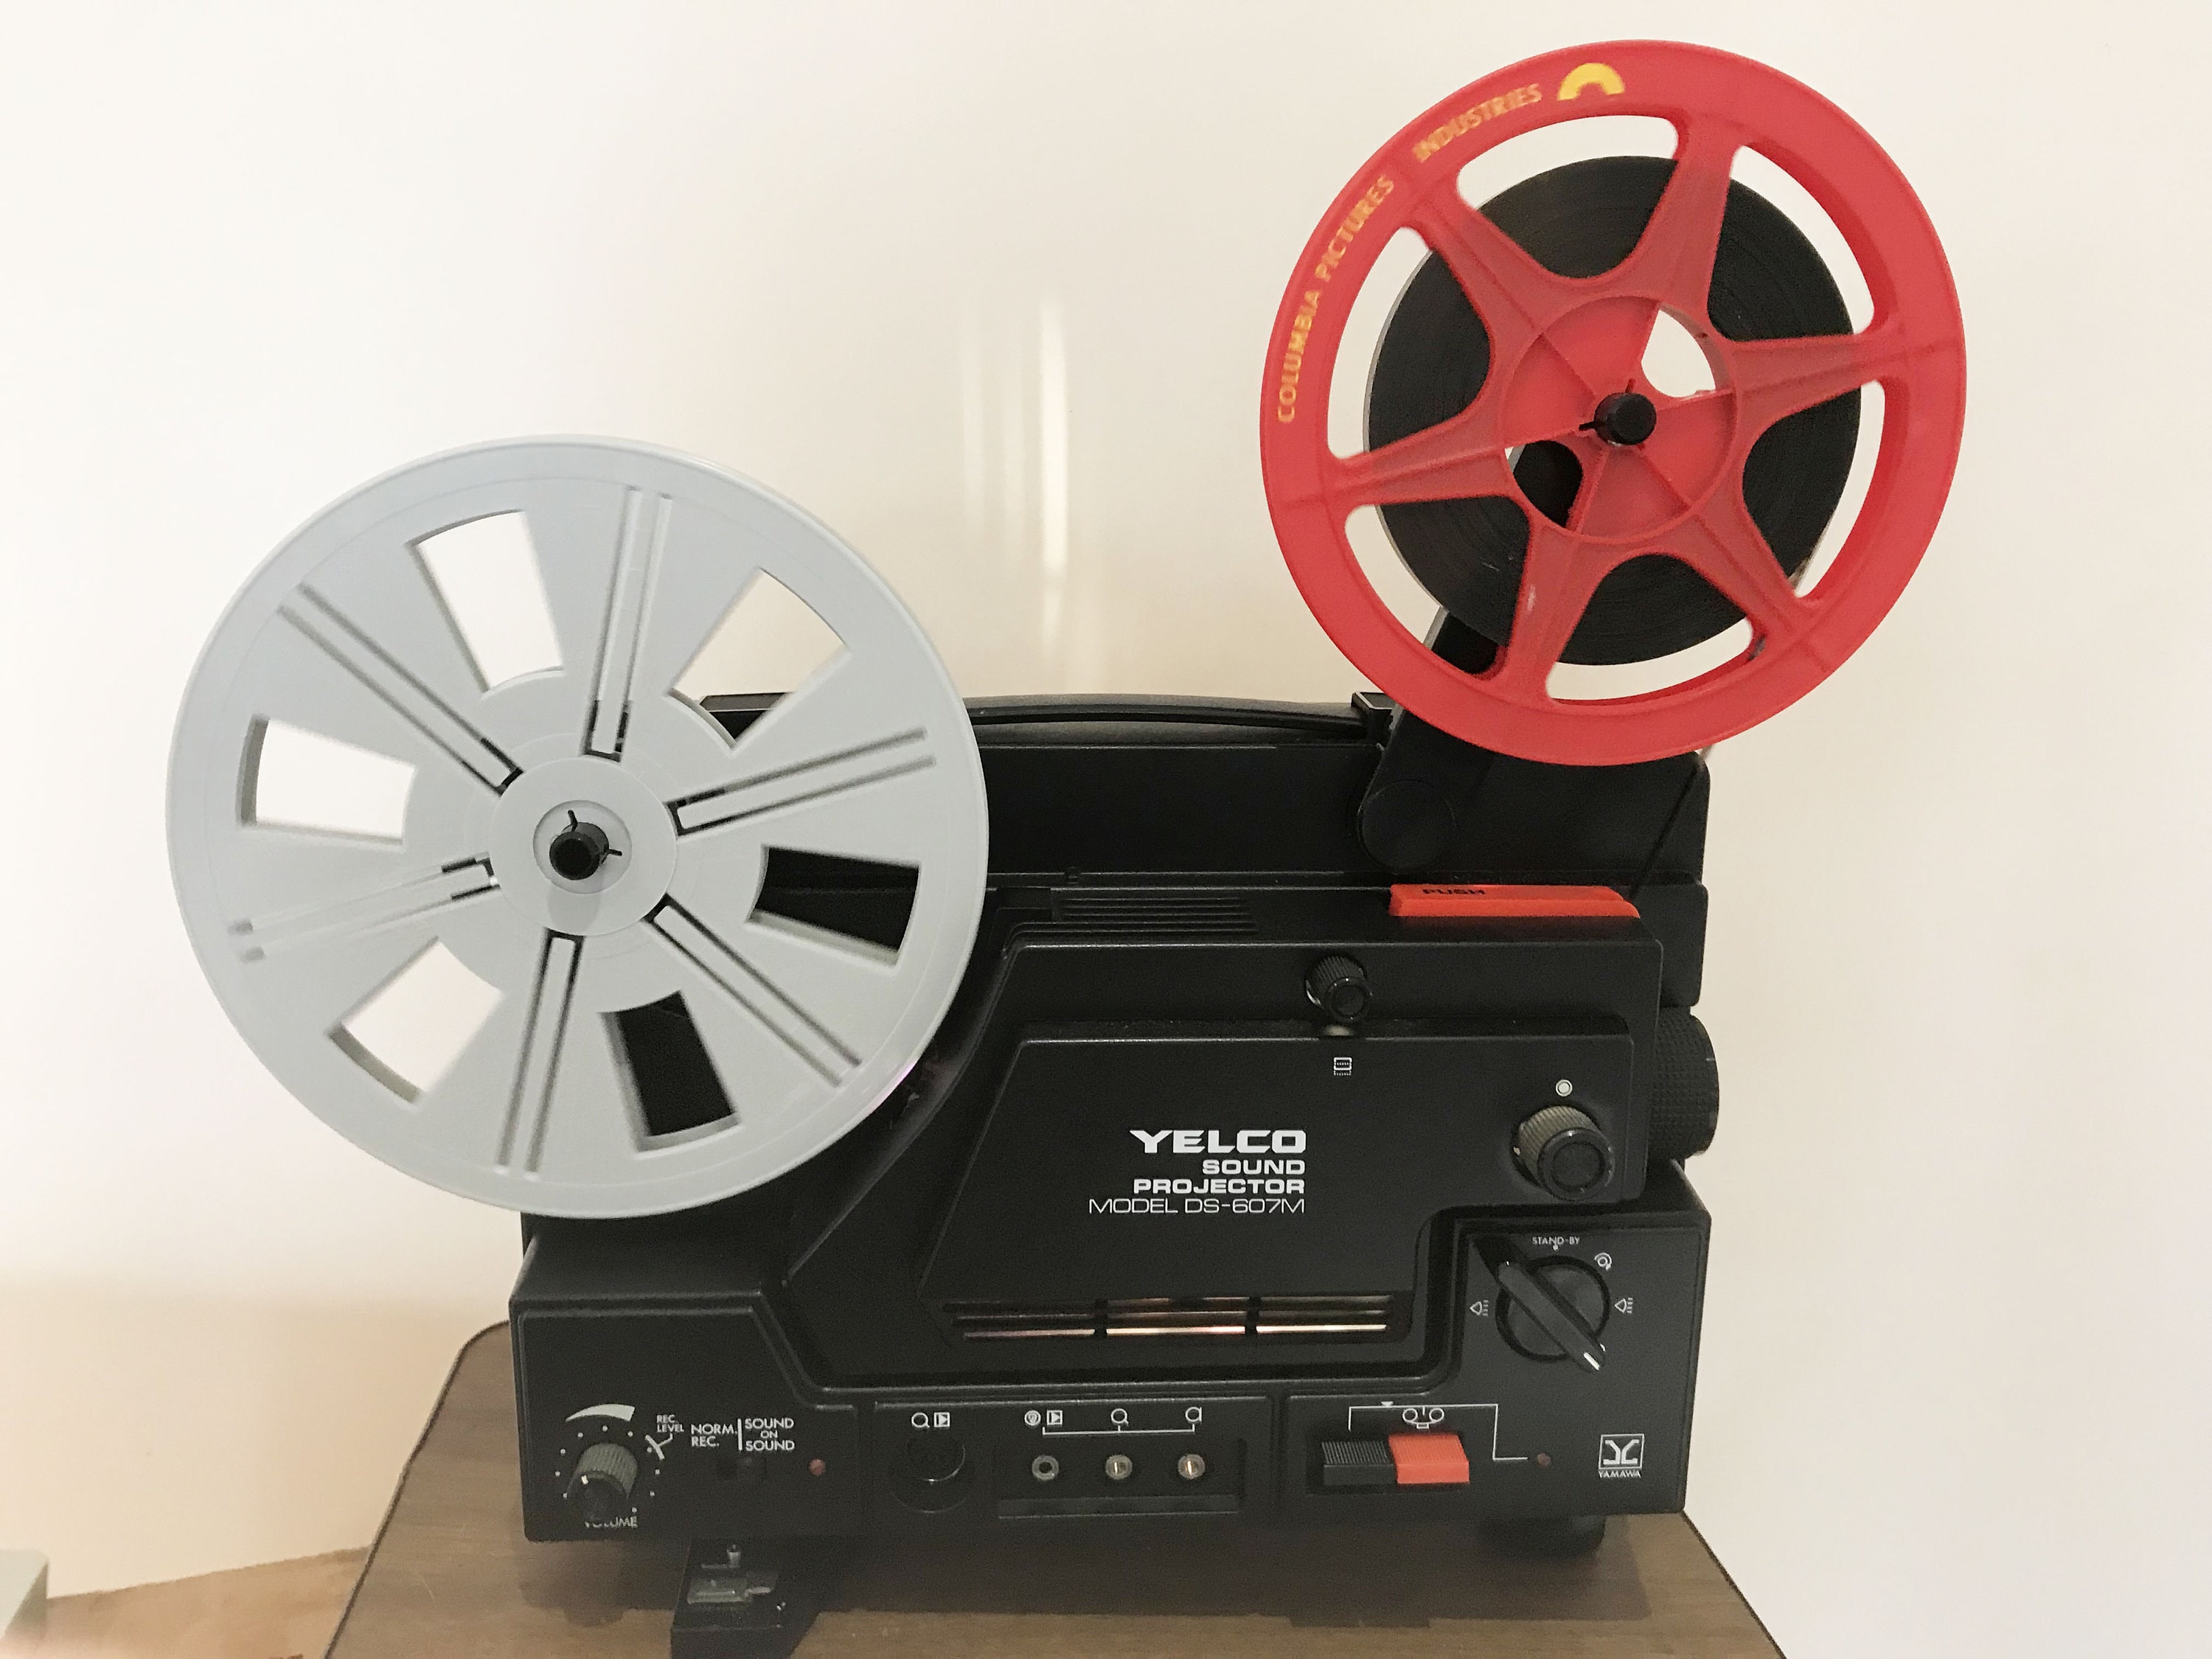 Yelco DS-607M Sound SUPER 8 Cine Film Projector Fully Serviced Ready to Go  